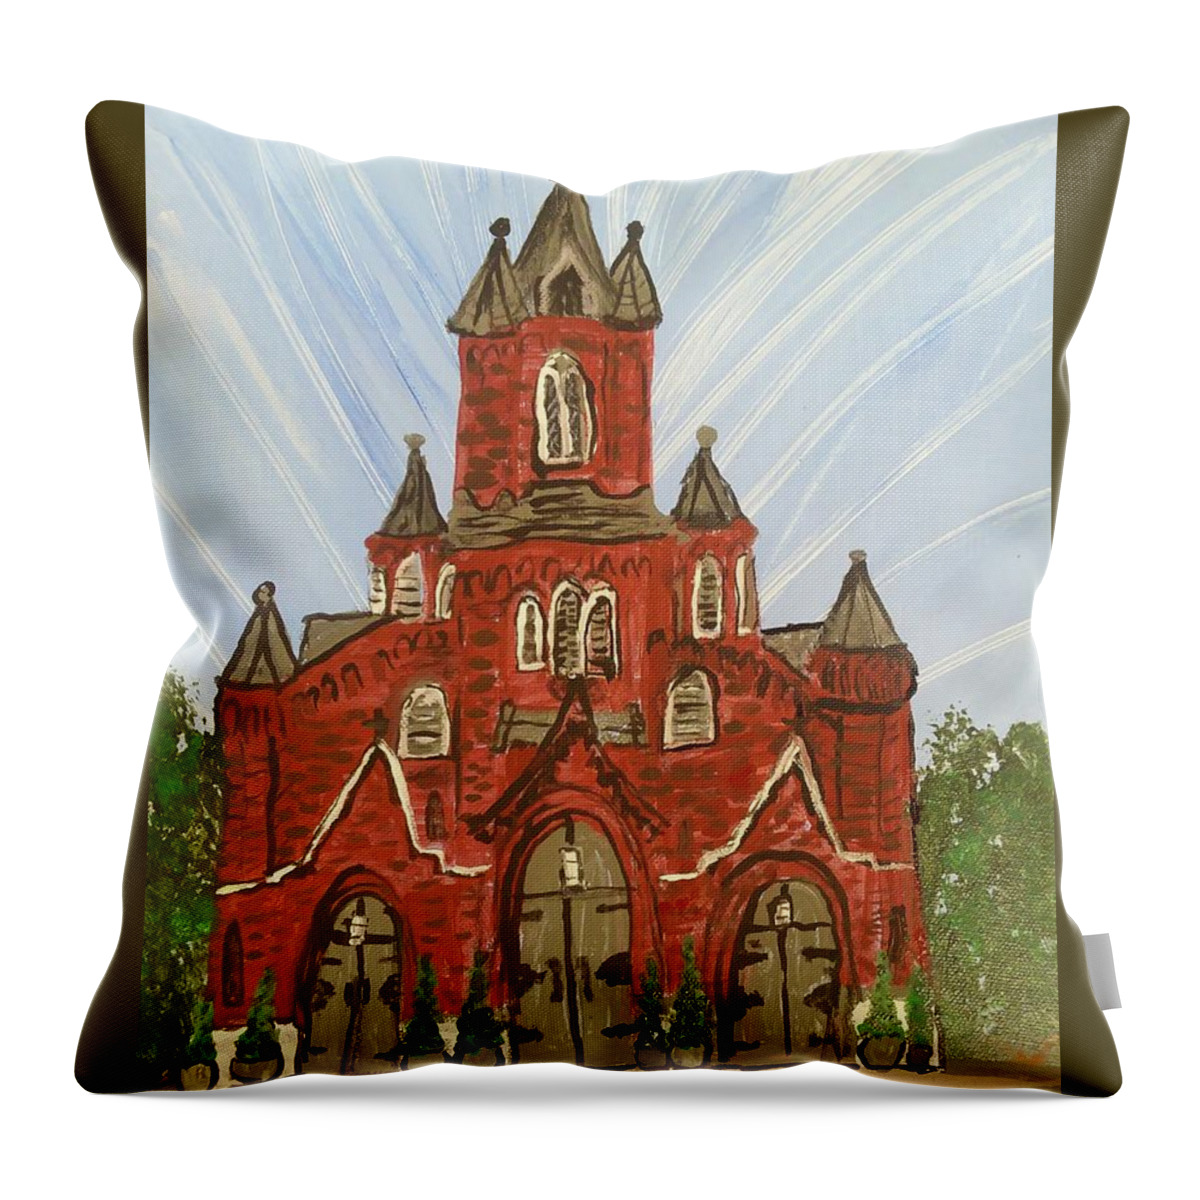 St. Landry Church Throw Pillow featuring the painting St. Landry Church by Seaux-N-Seau Soileau